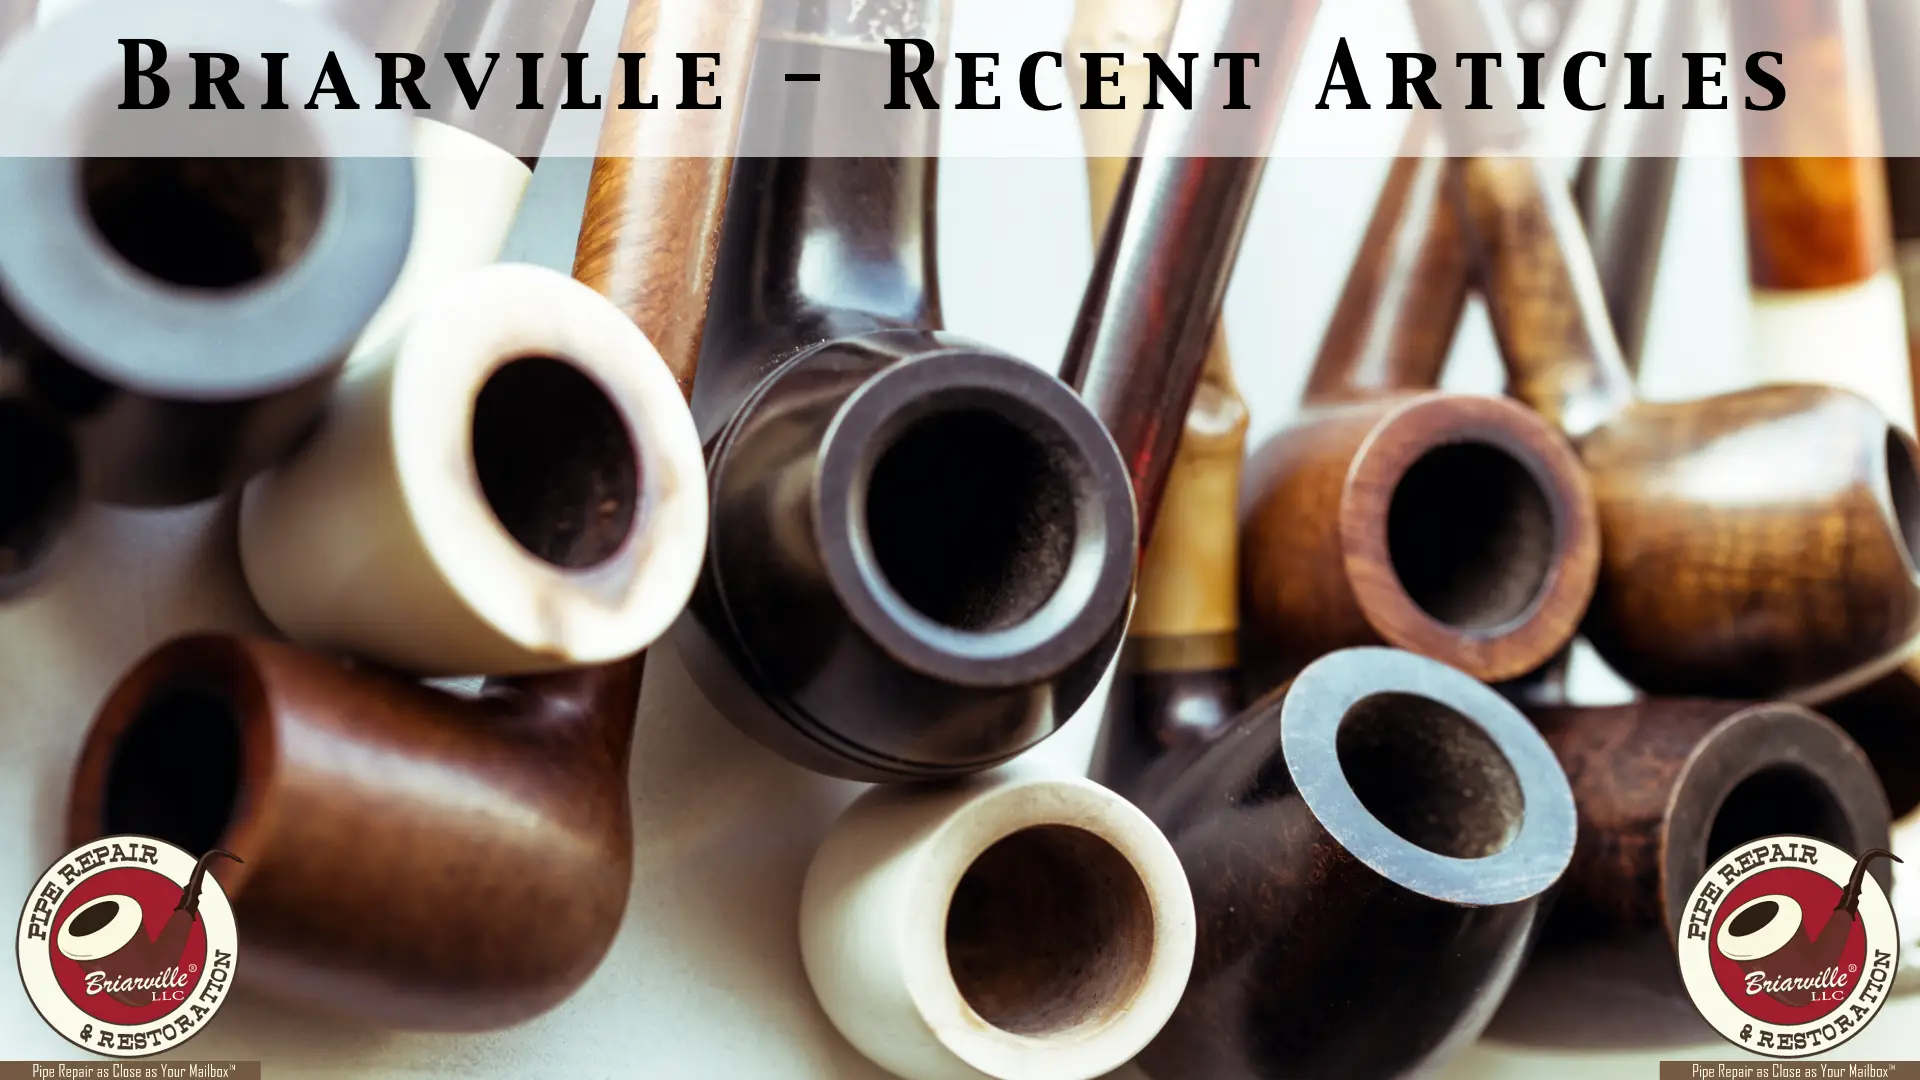 BRIARVILLE - RECENT ARTICLES